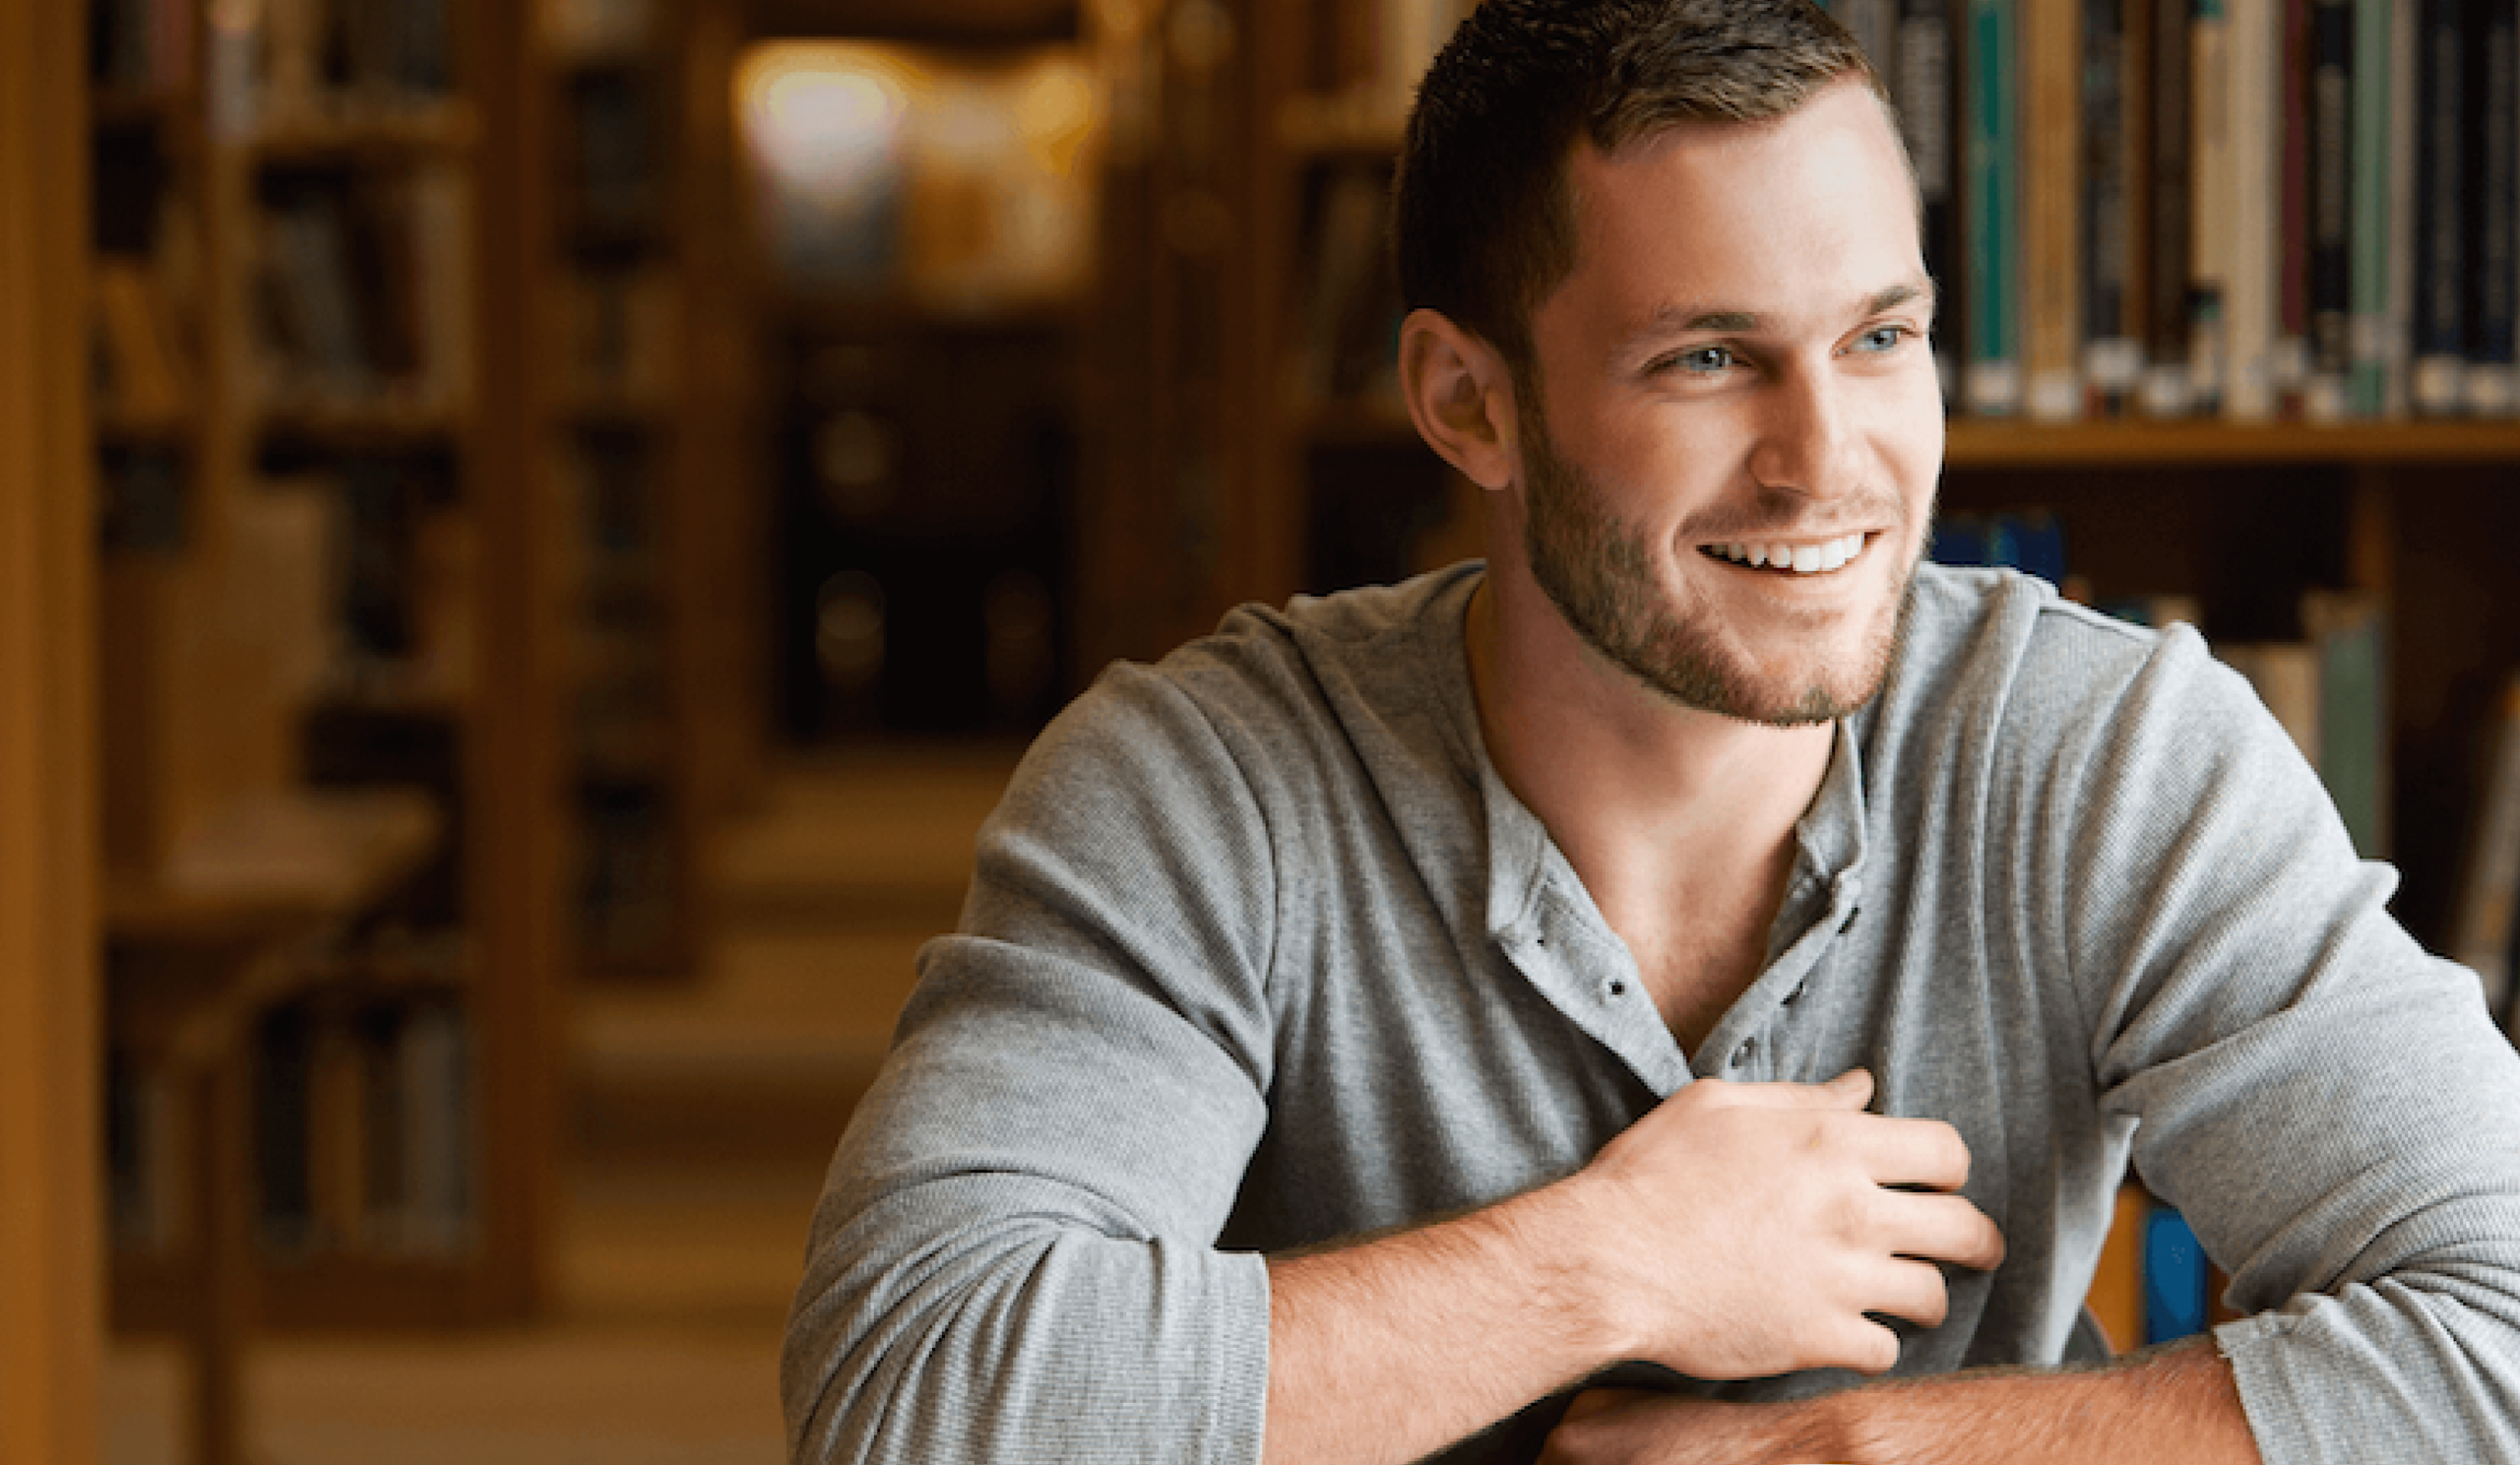 Image of a man in a library smiling